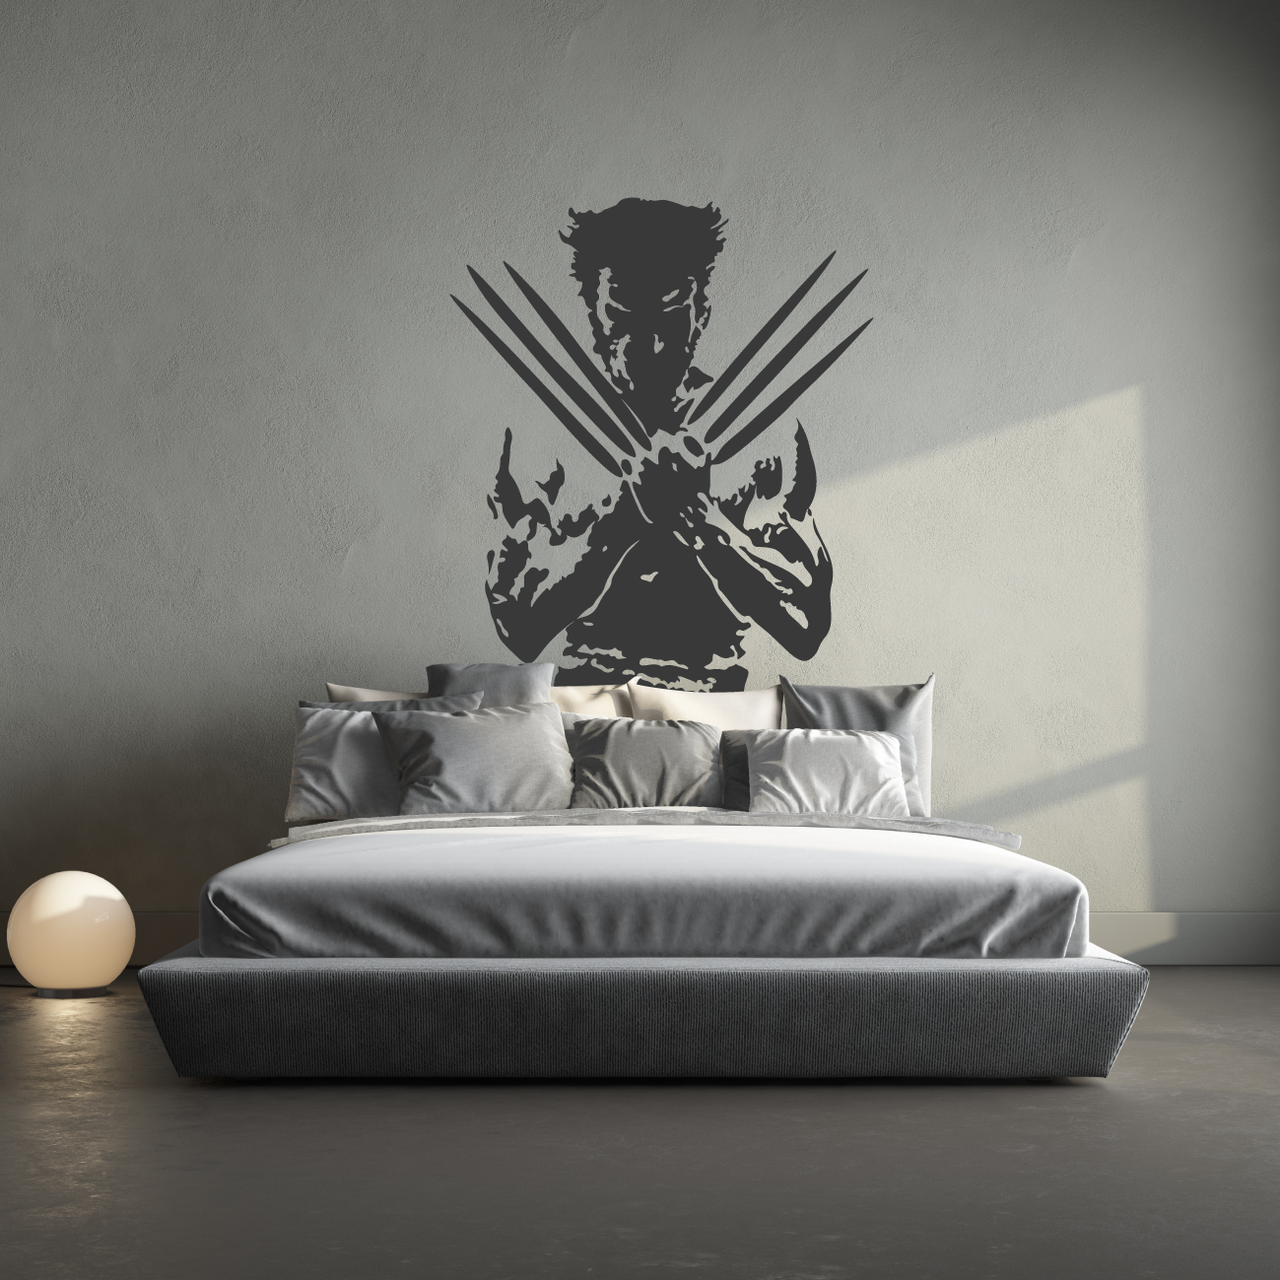 Wolverine Wall Decal